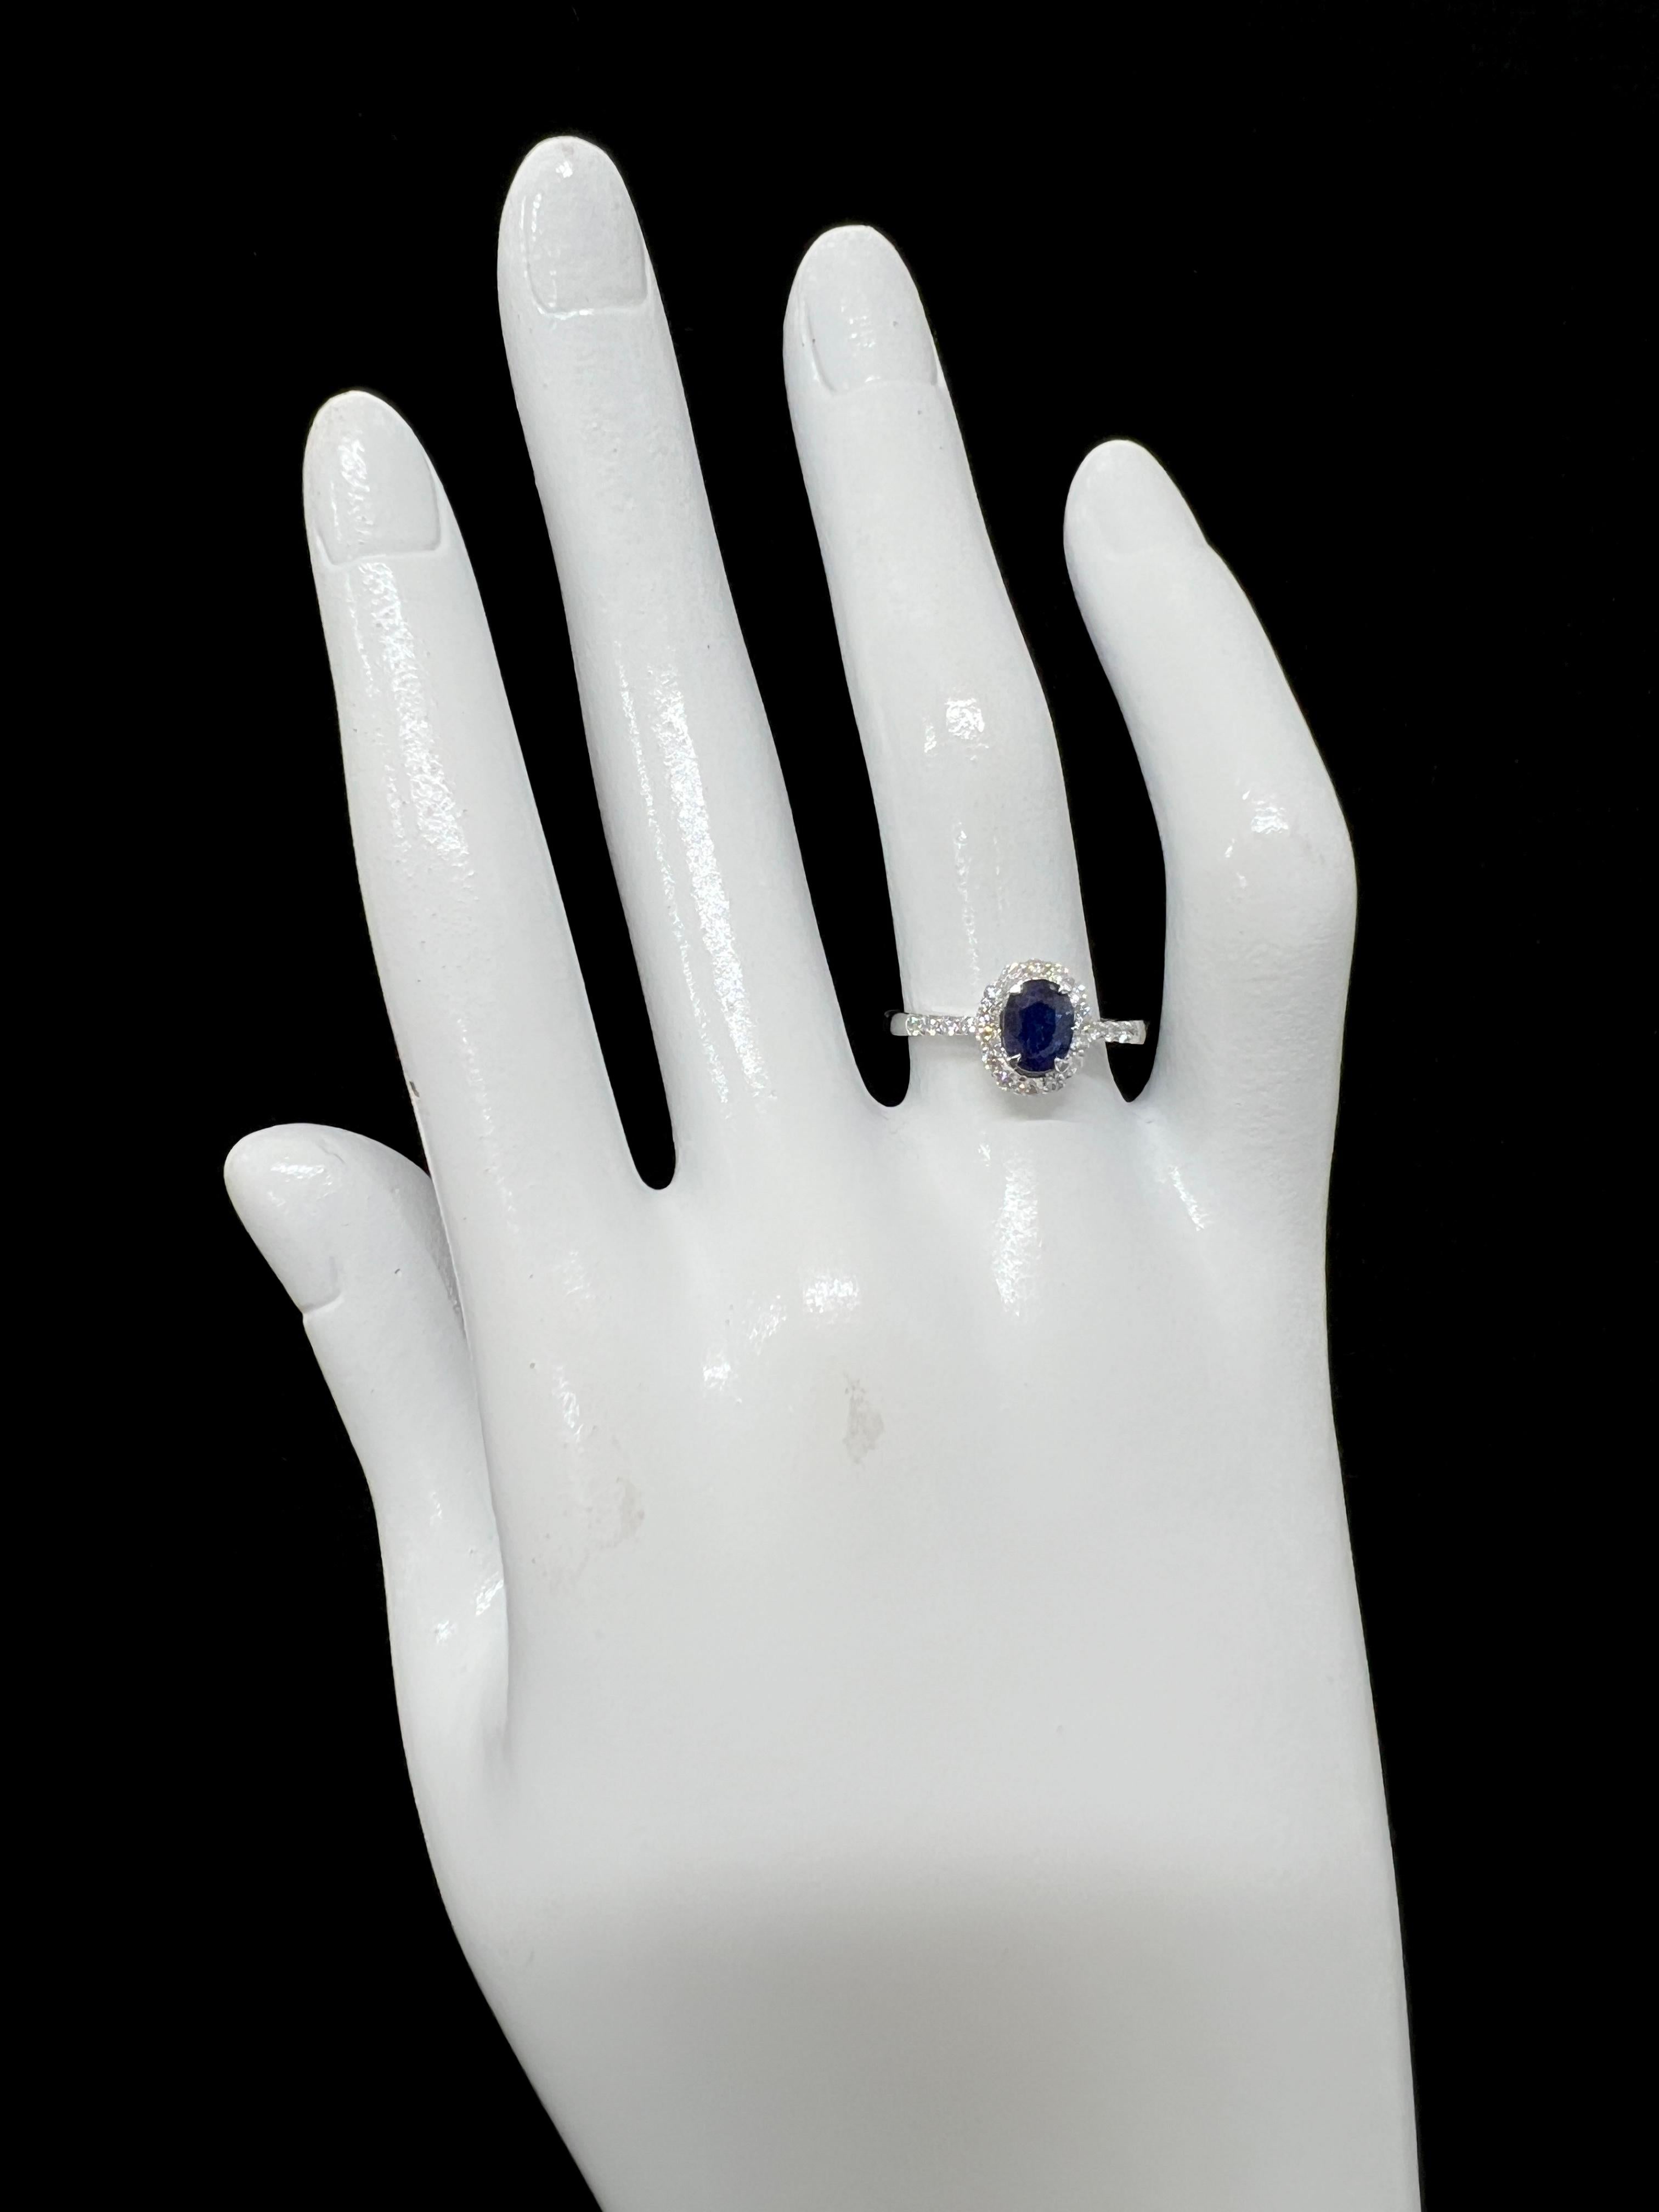 1.07 Carat, Unheated, Royal Blue Color Sapphire and Diamond Ring Set in Platinum For Sale 1